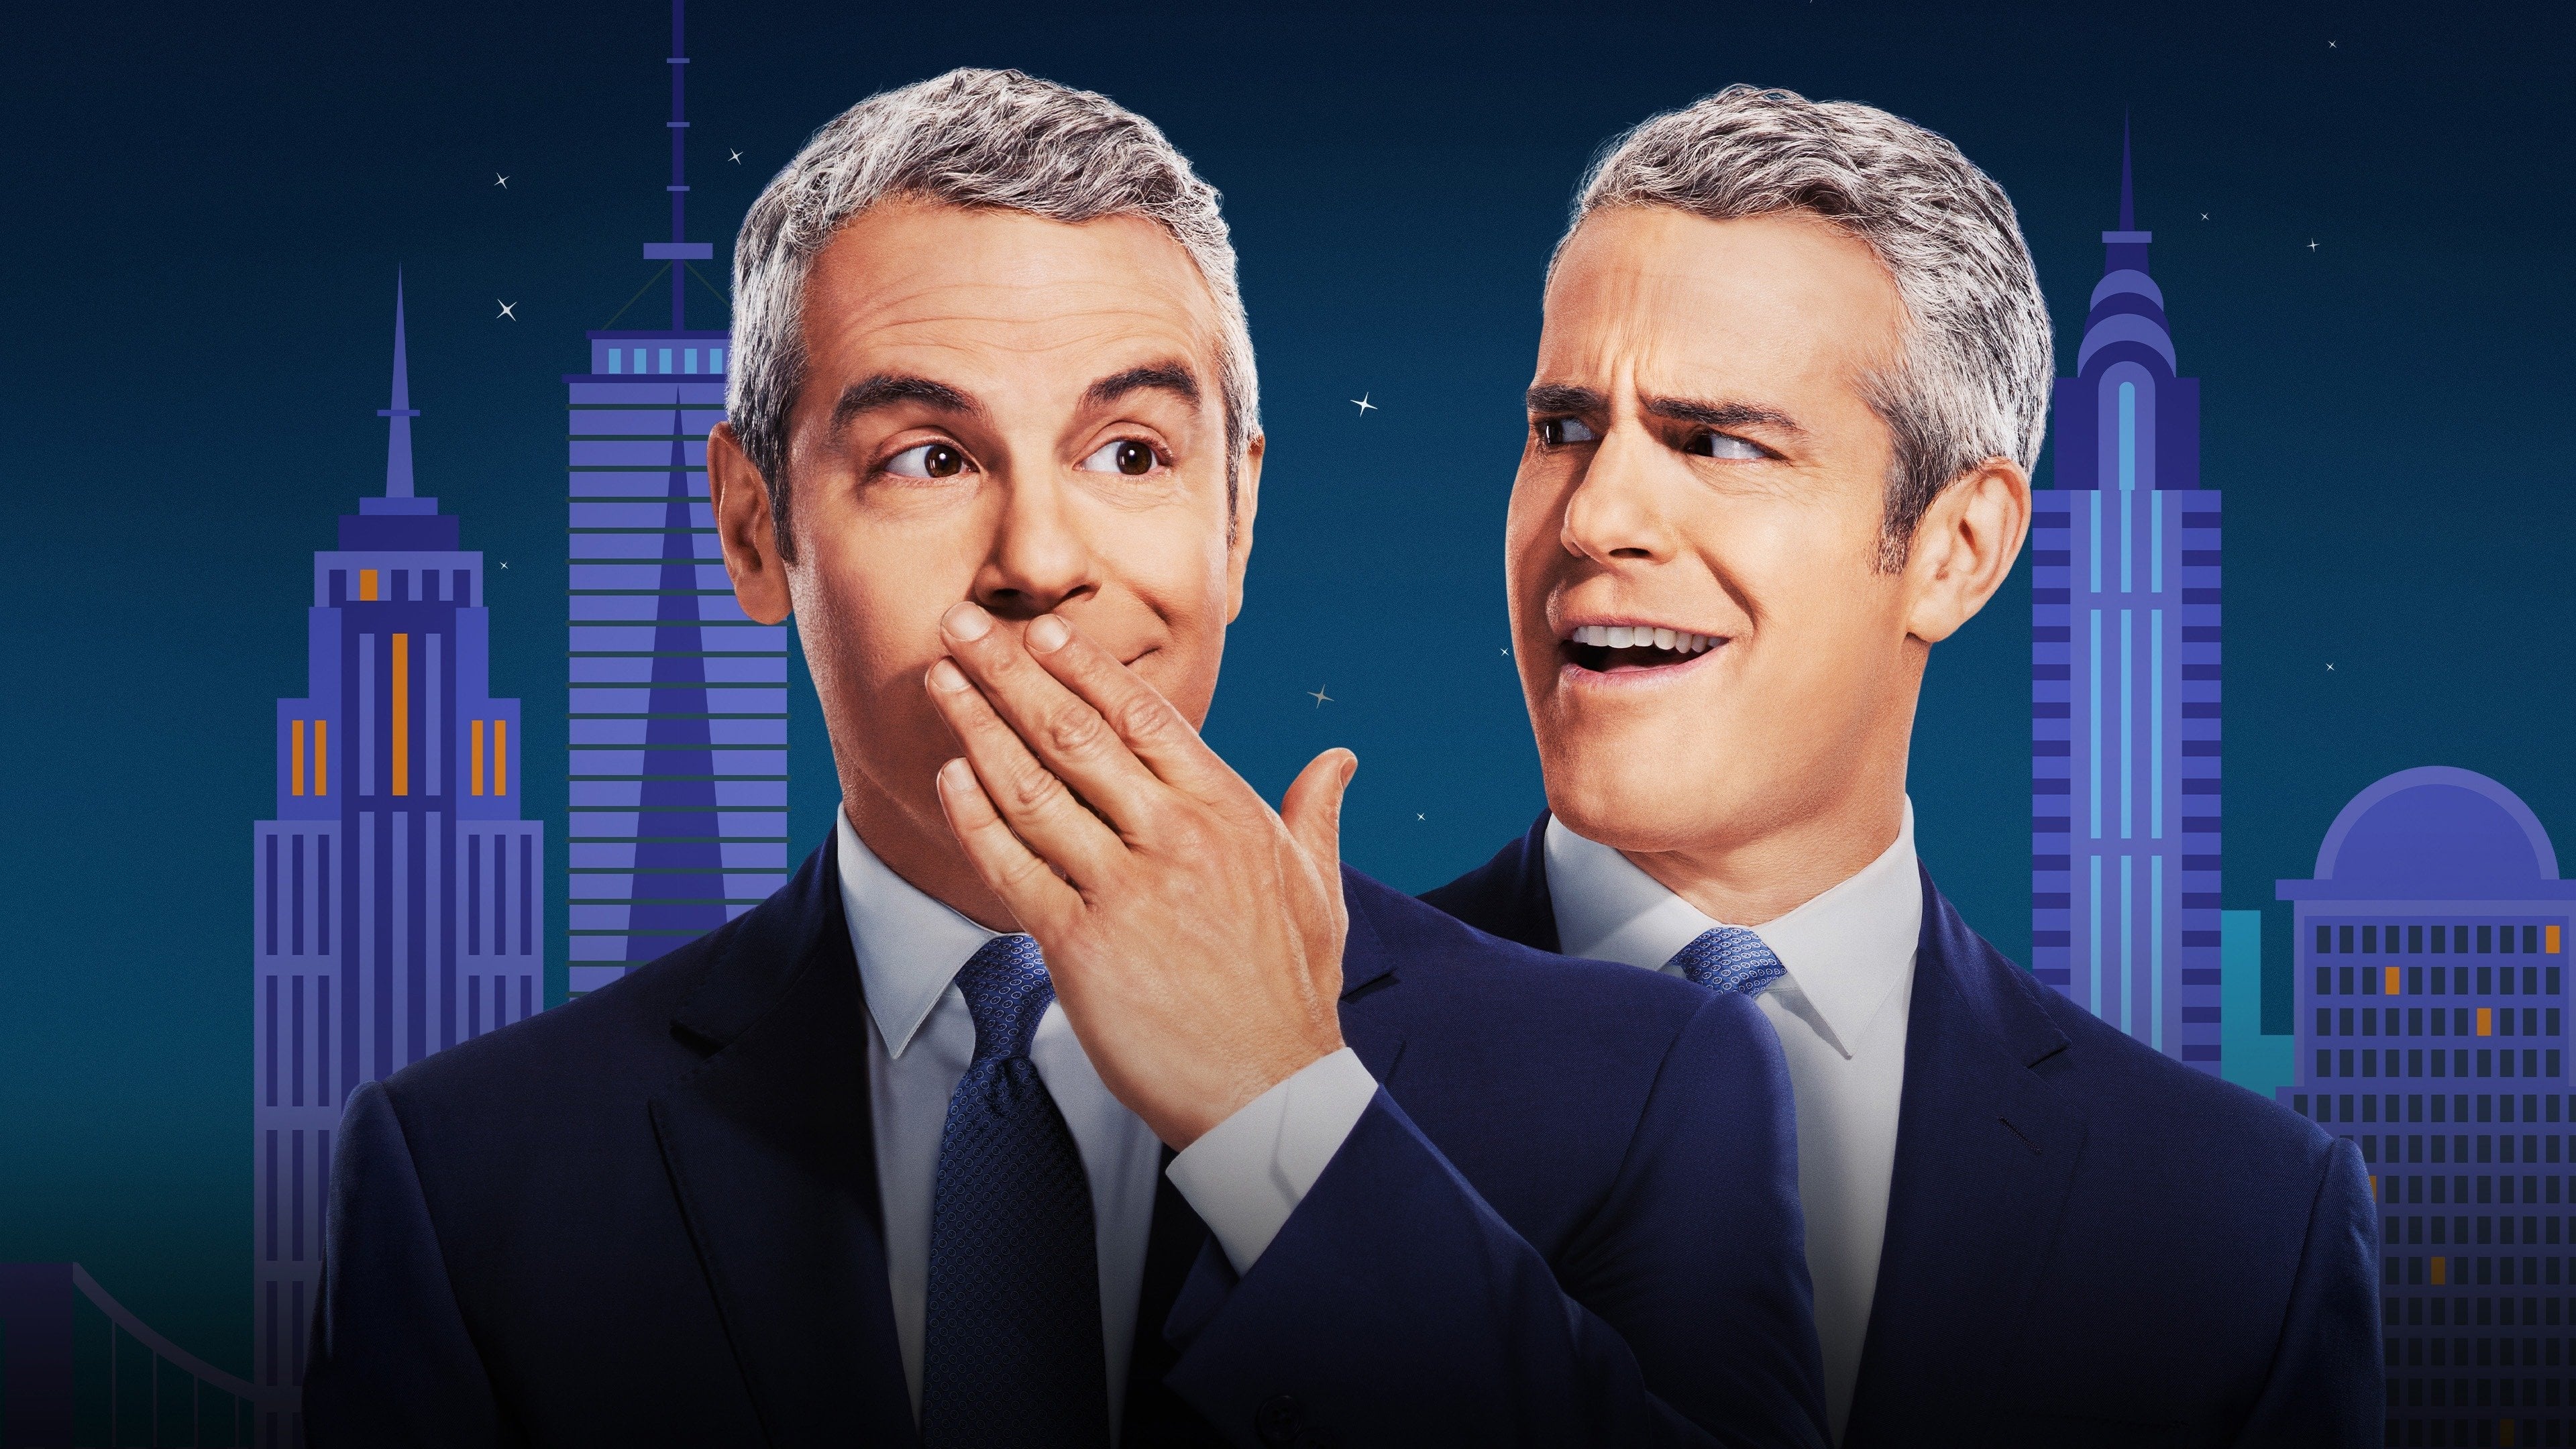 Watch What Happens Live with Andy Cohen - serie